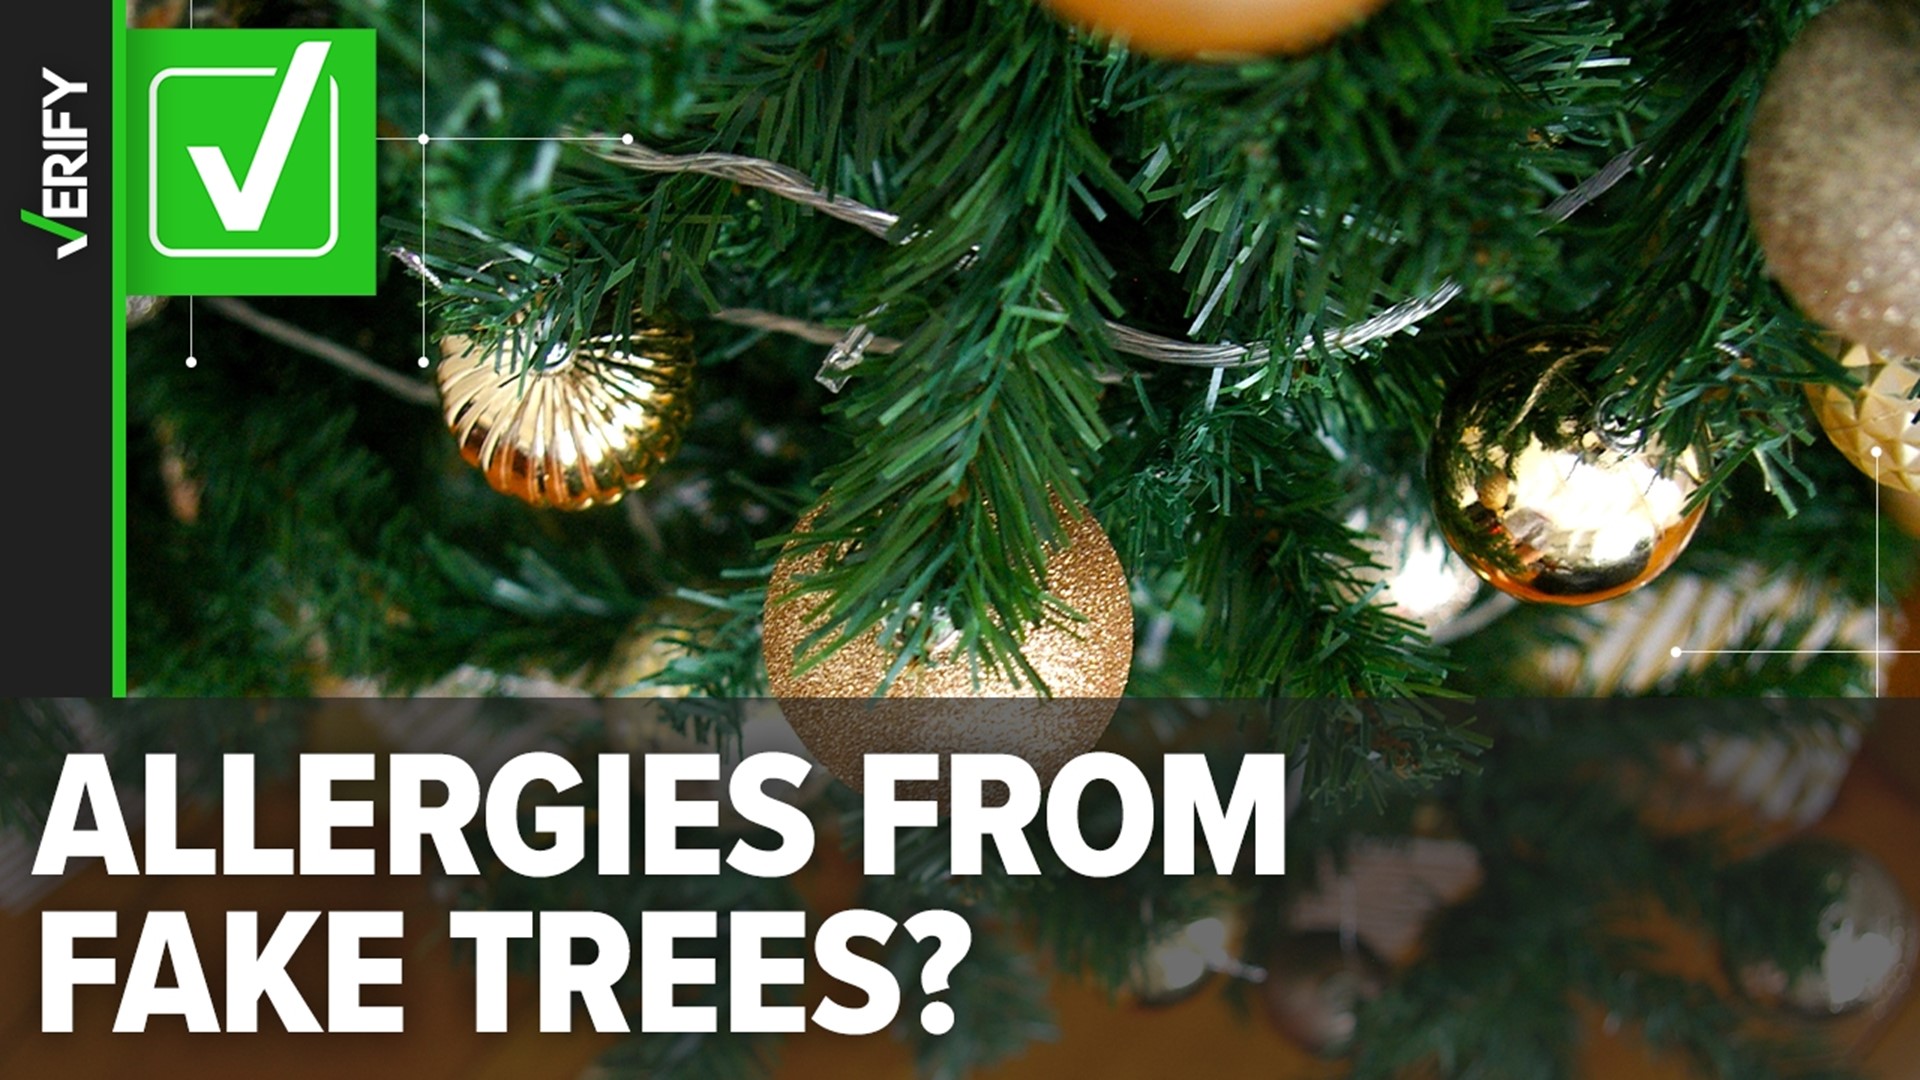 Allergies don’t only affect people who put up real Christmas trees. An artificial tree can harbor dust, mold and other allergens, too.